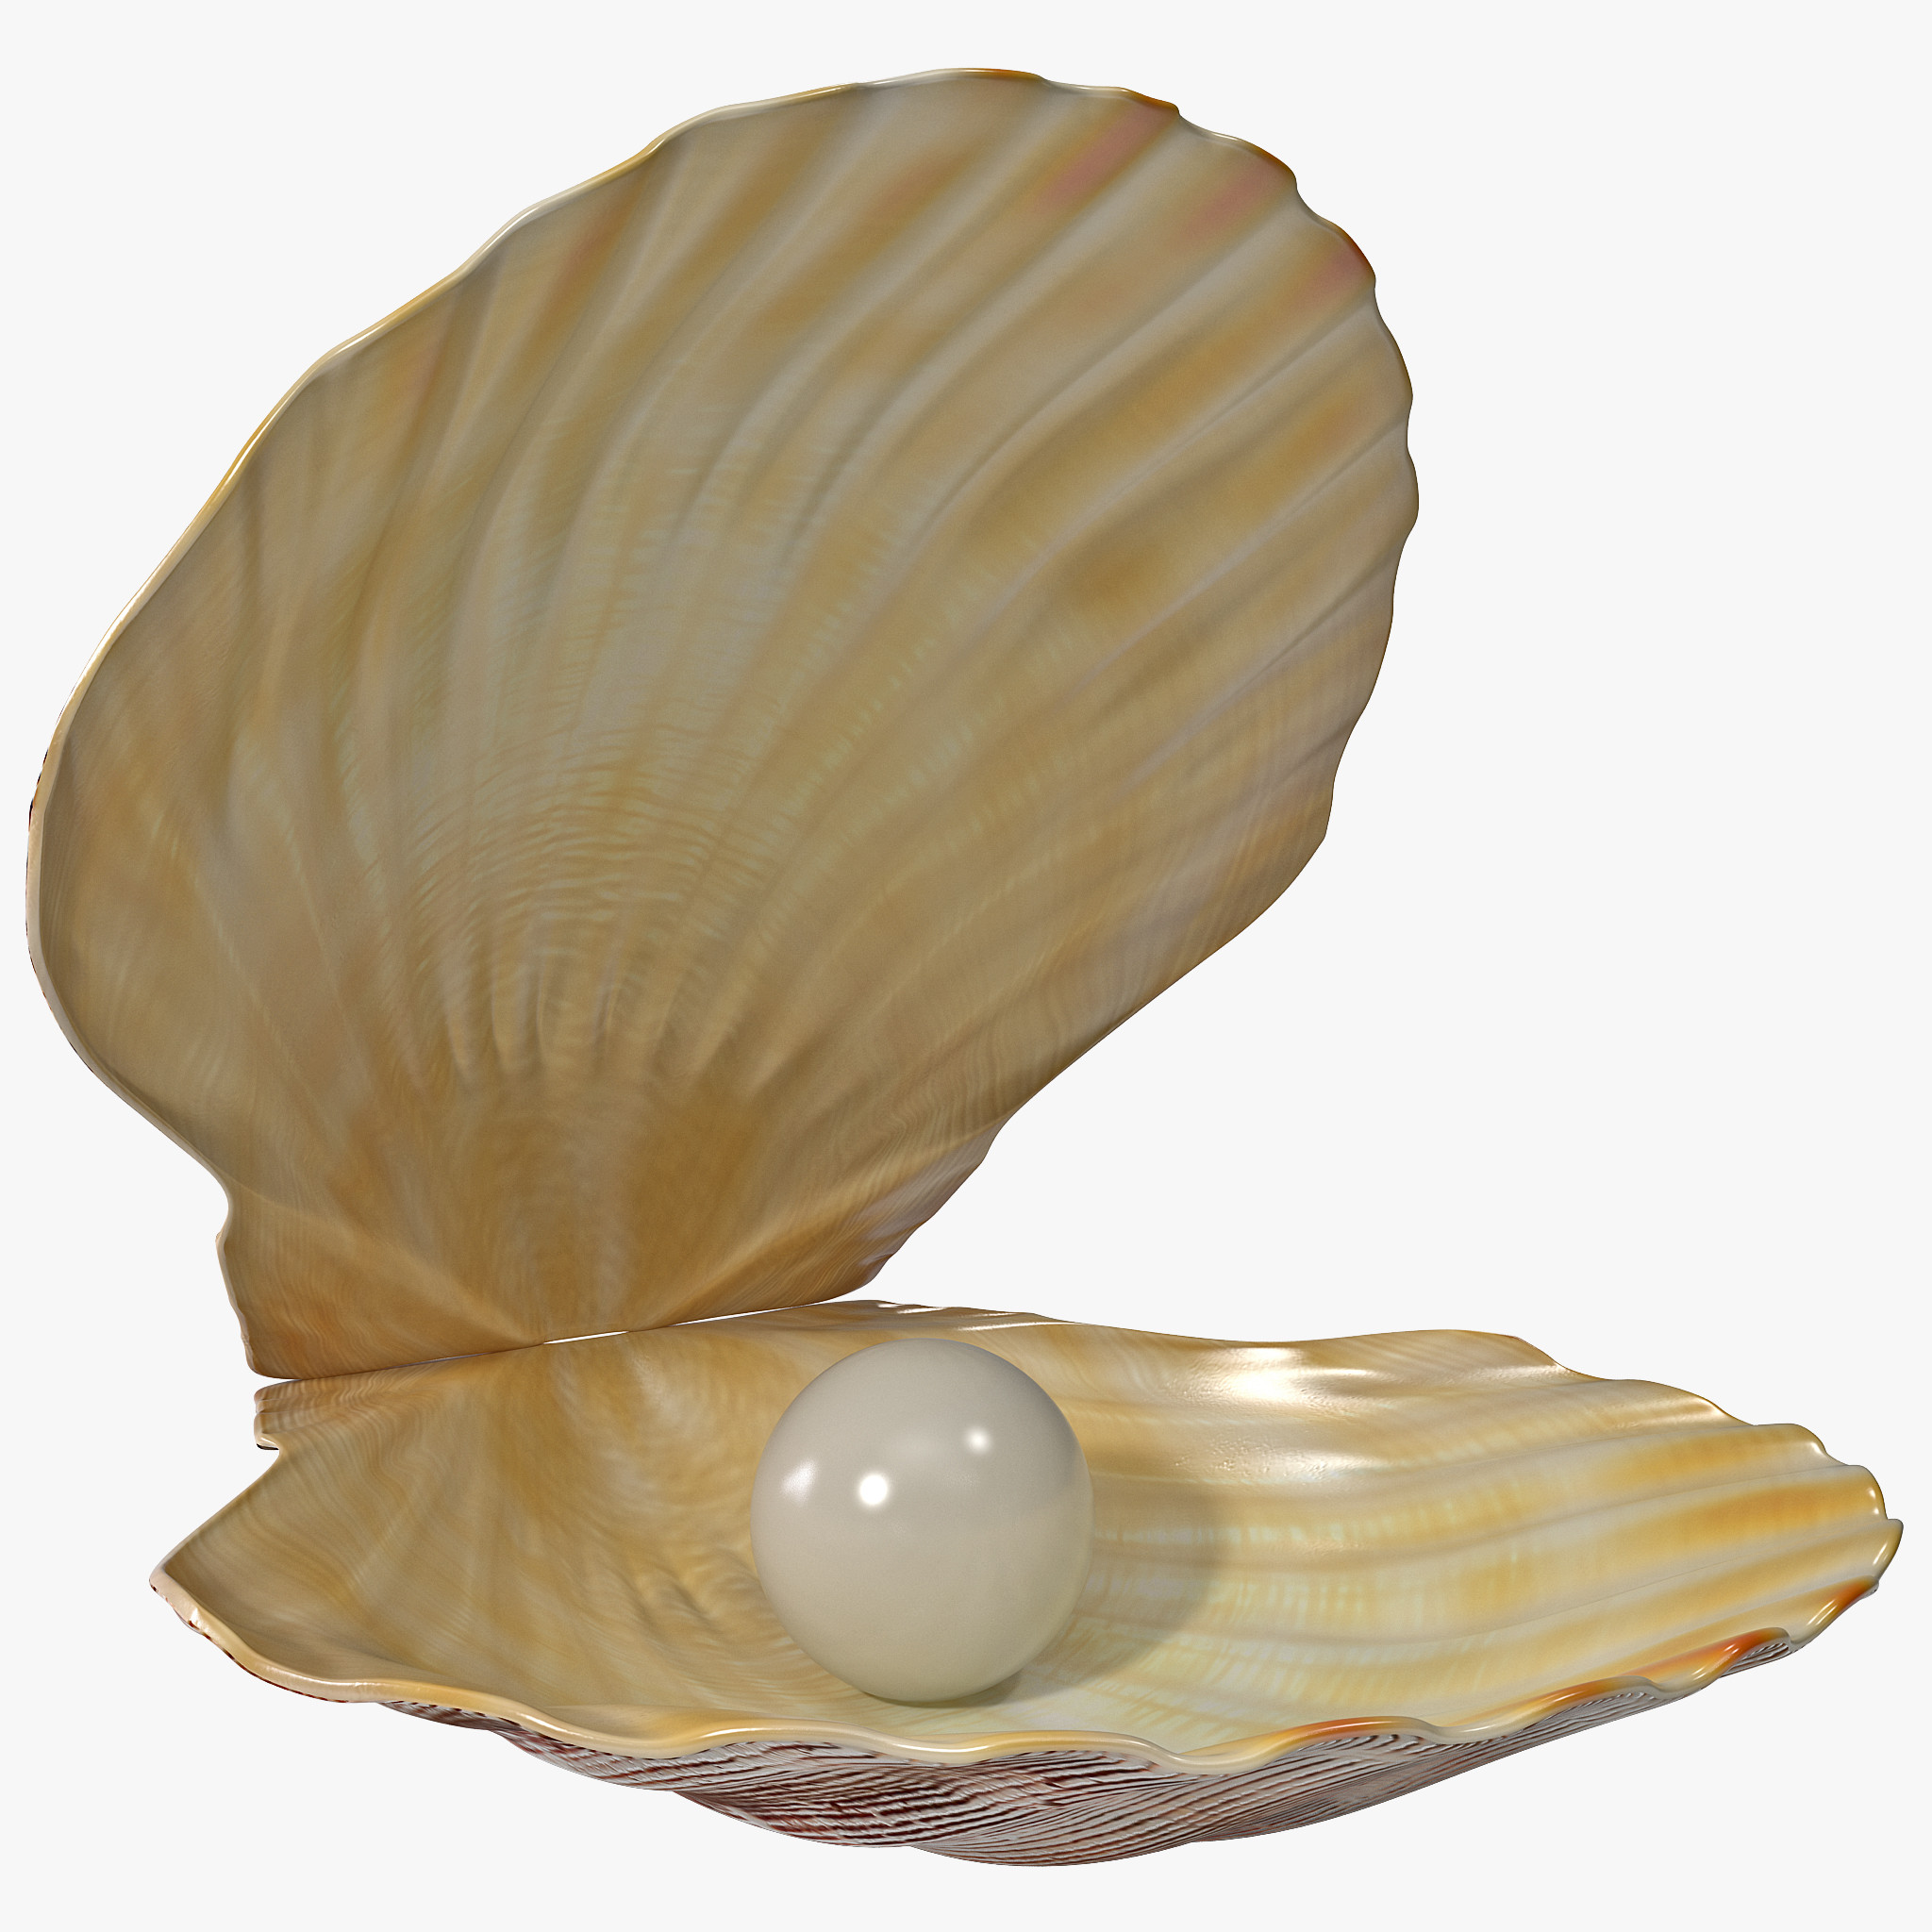 Image of a white pearl ball i